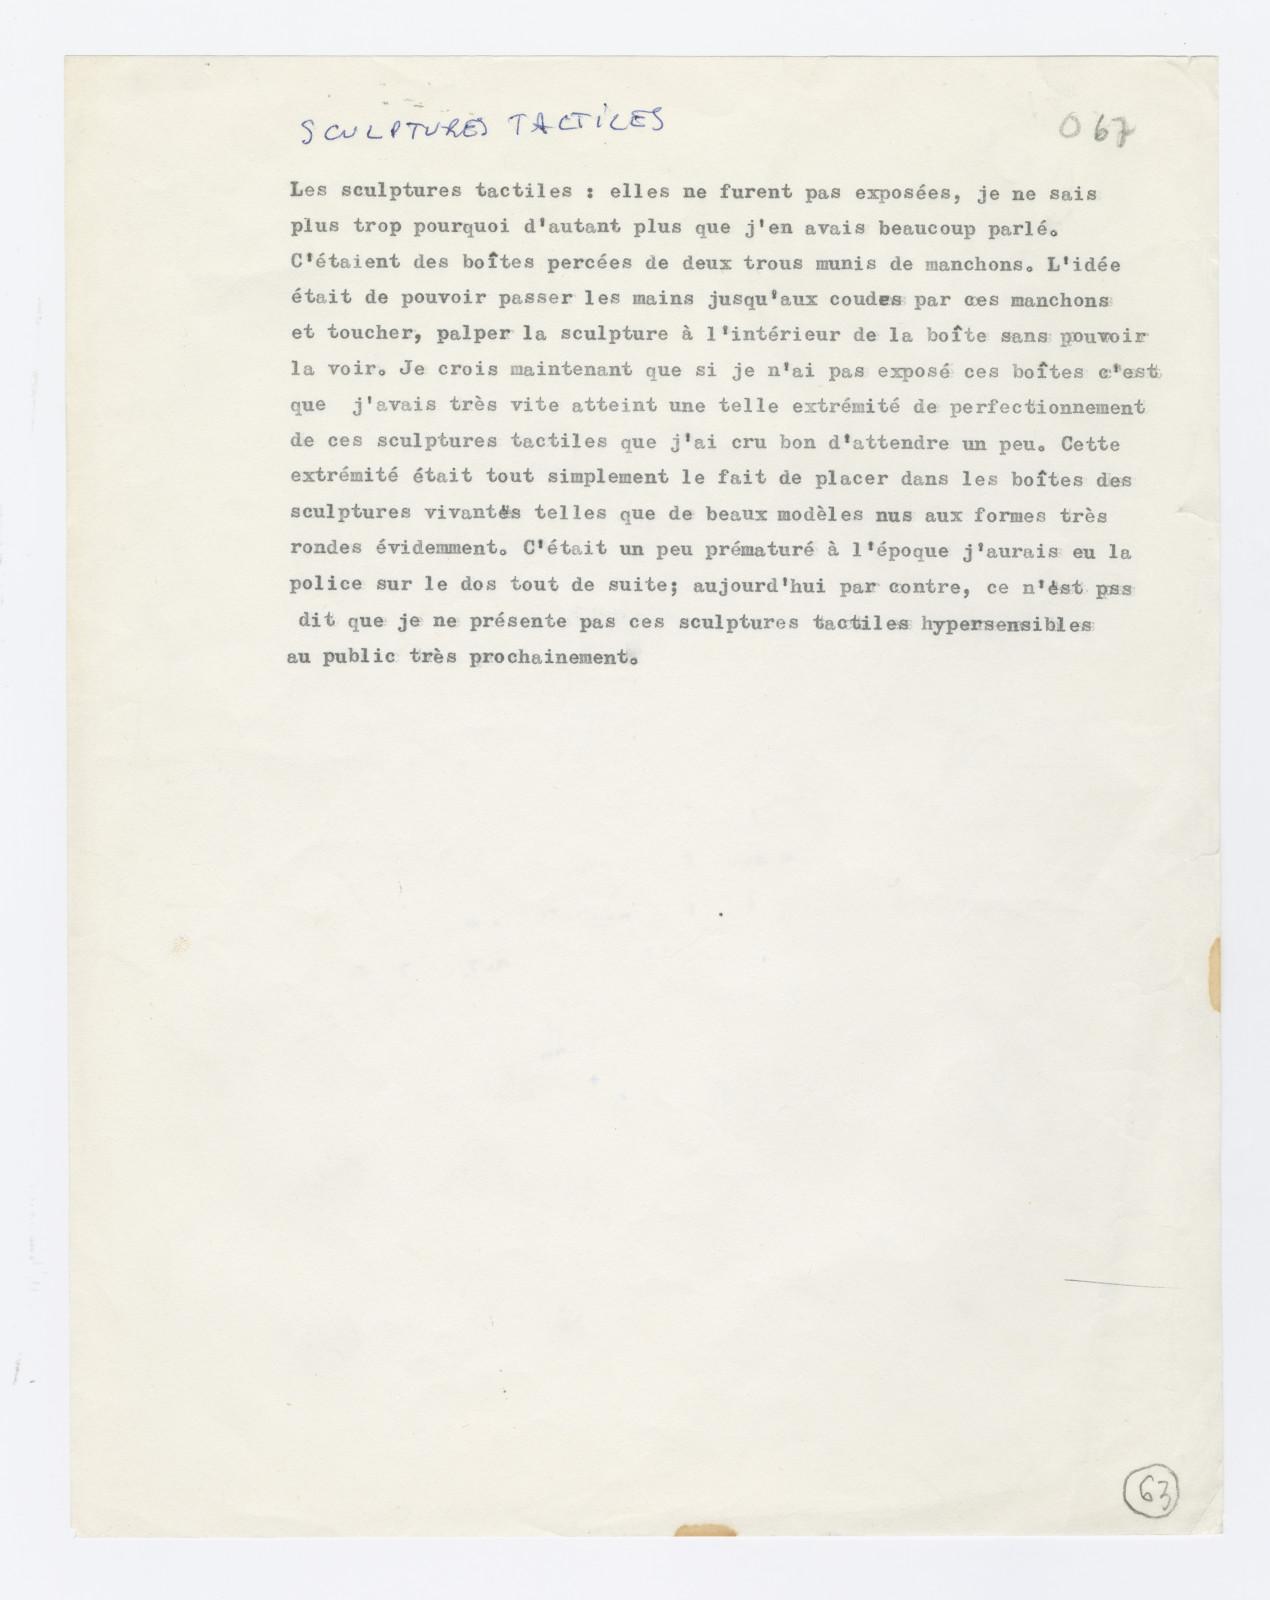 Yves Klein, Note on the Tactile Sculptures